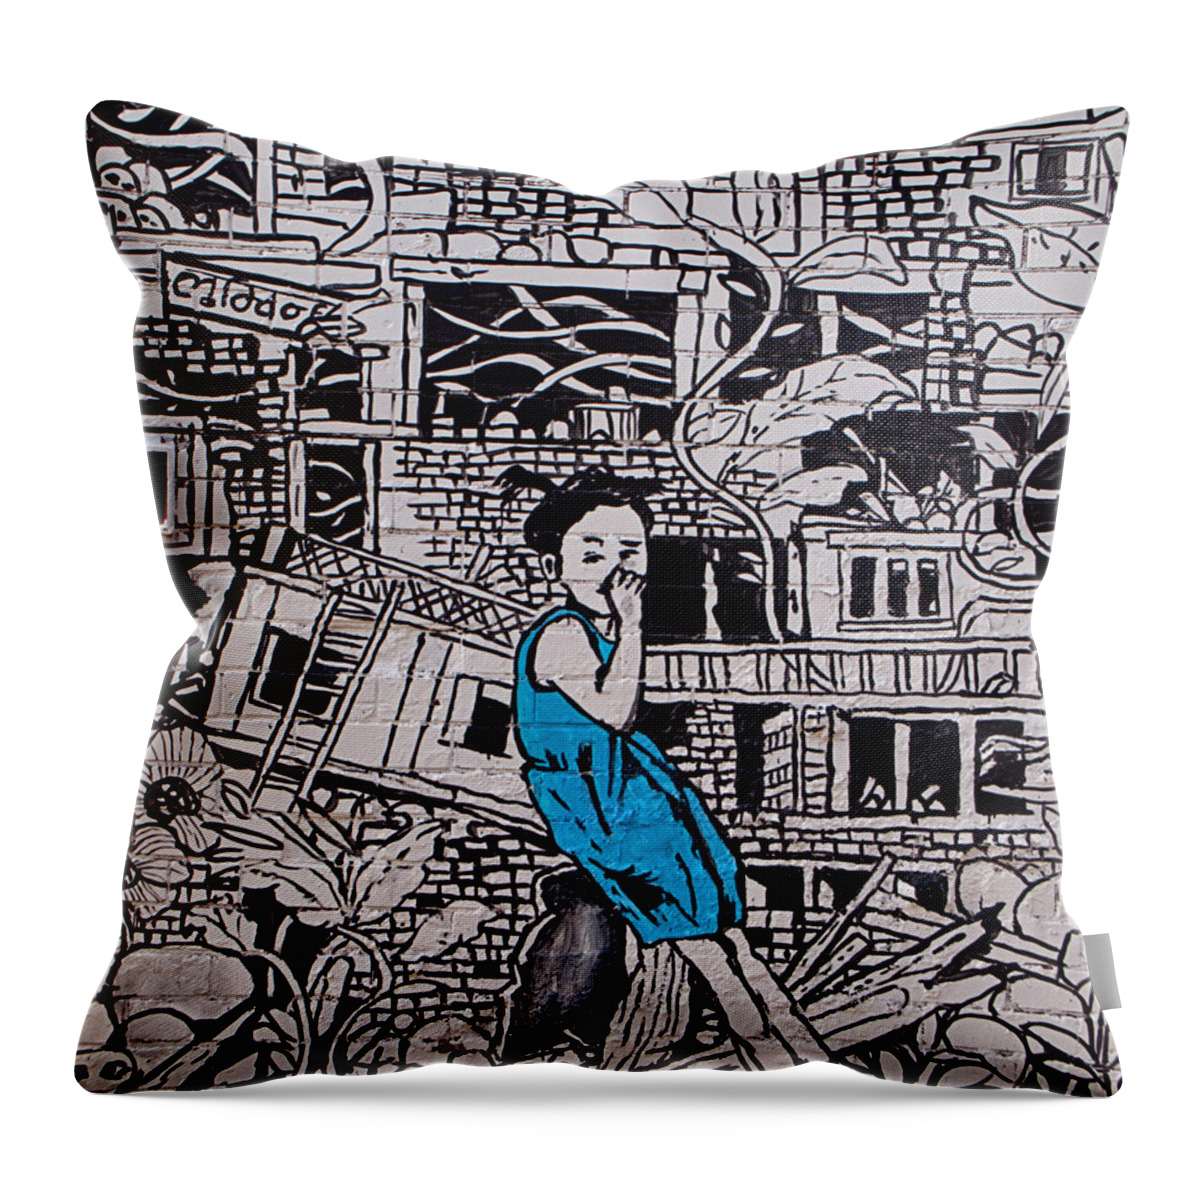 Street Art Throw Pillow featuring the photograph Street Child by Newwwman